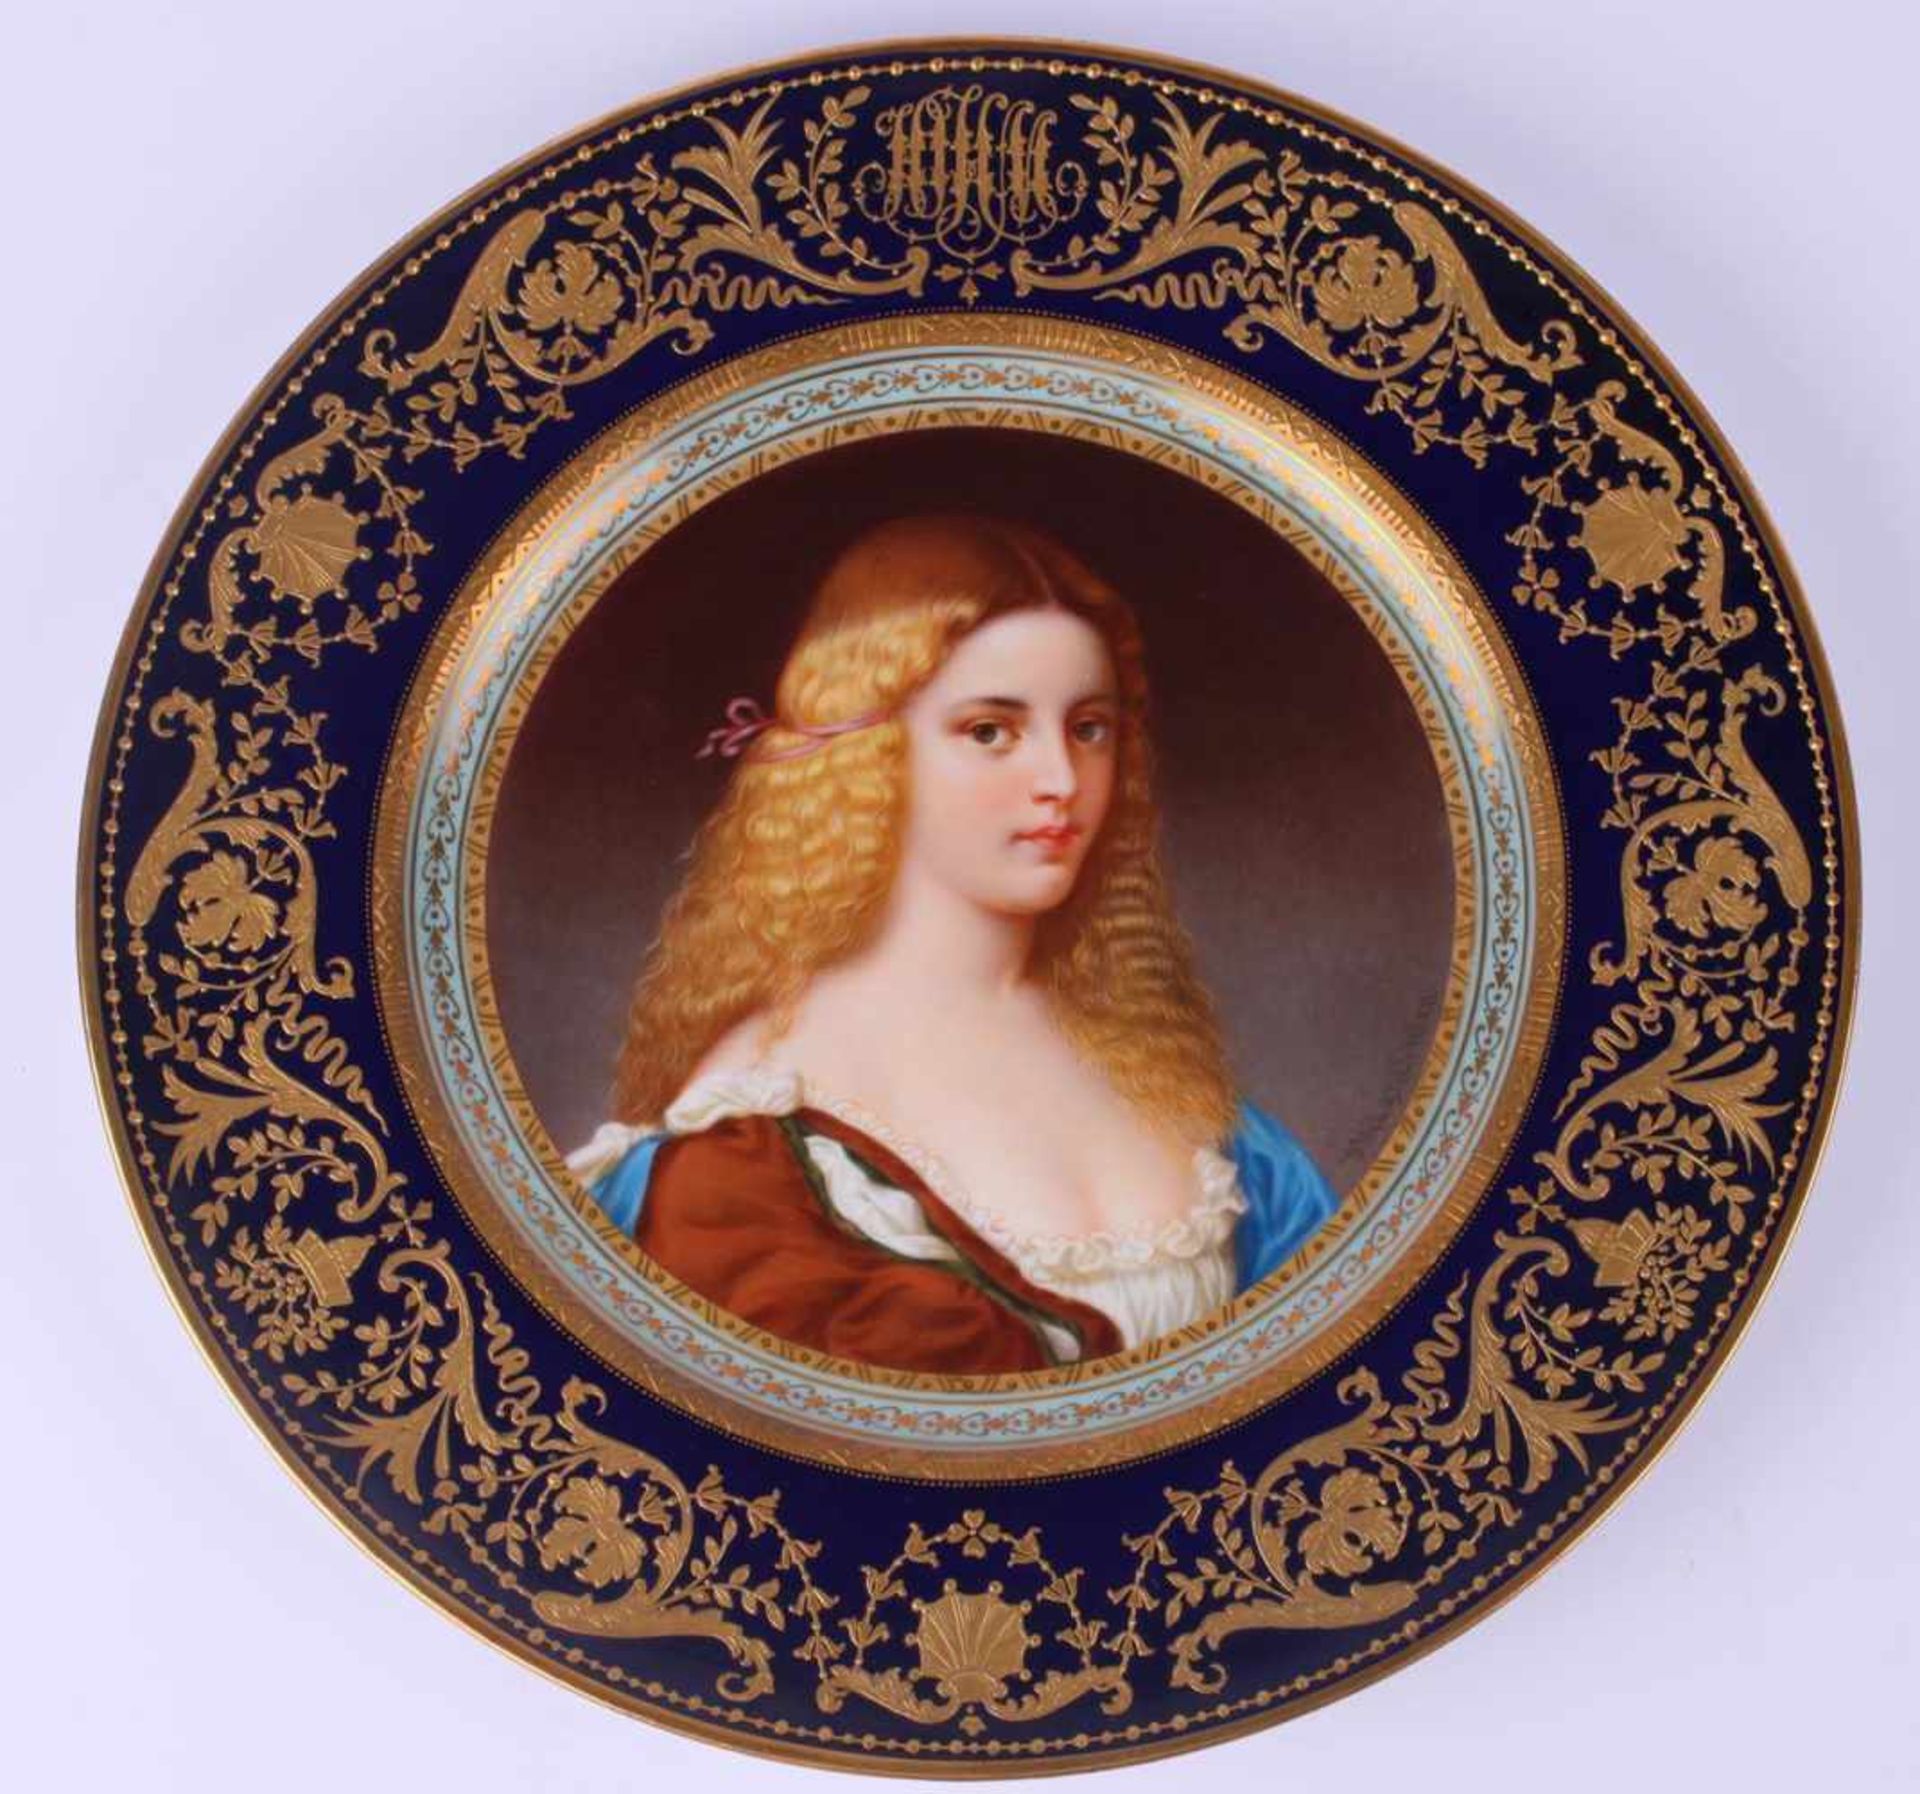 Decorative plate with a female portrait. Pirkenhammer plant.Porcelain gilded cabinet plate with a